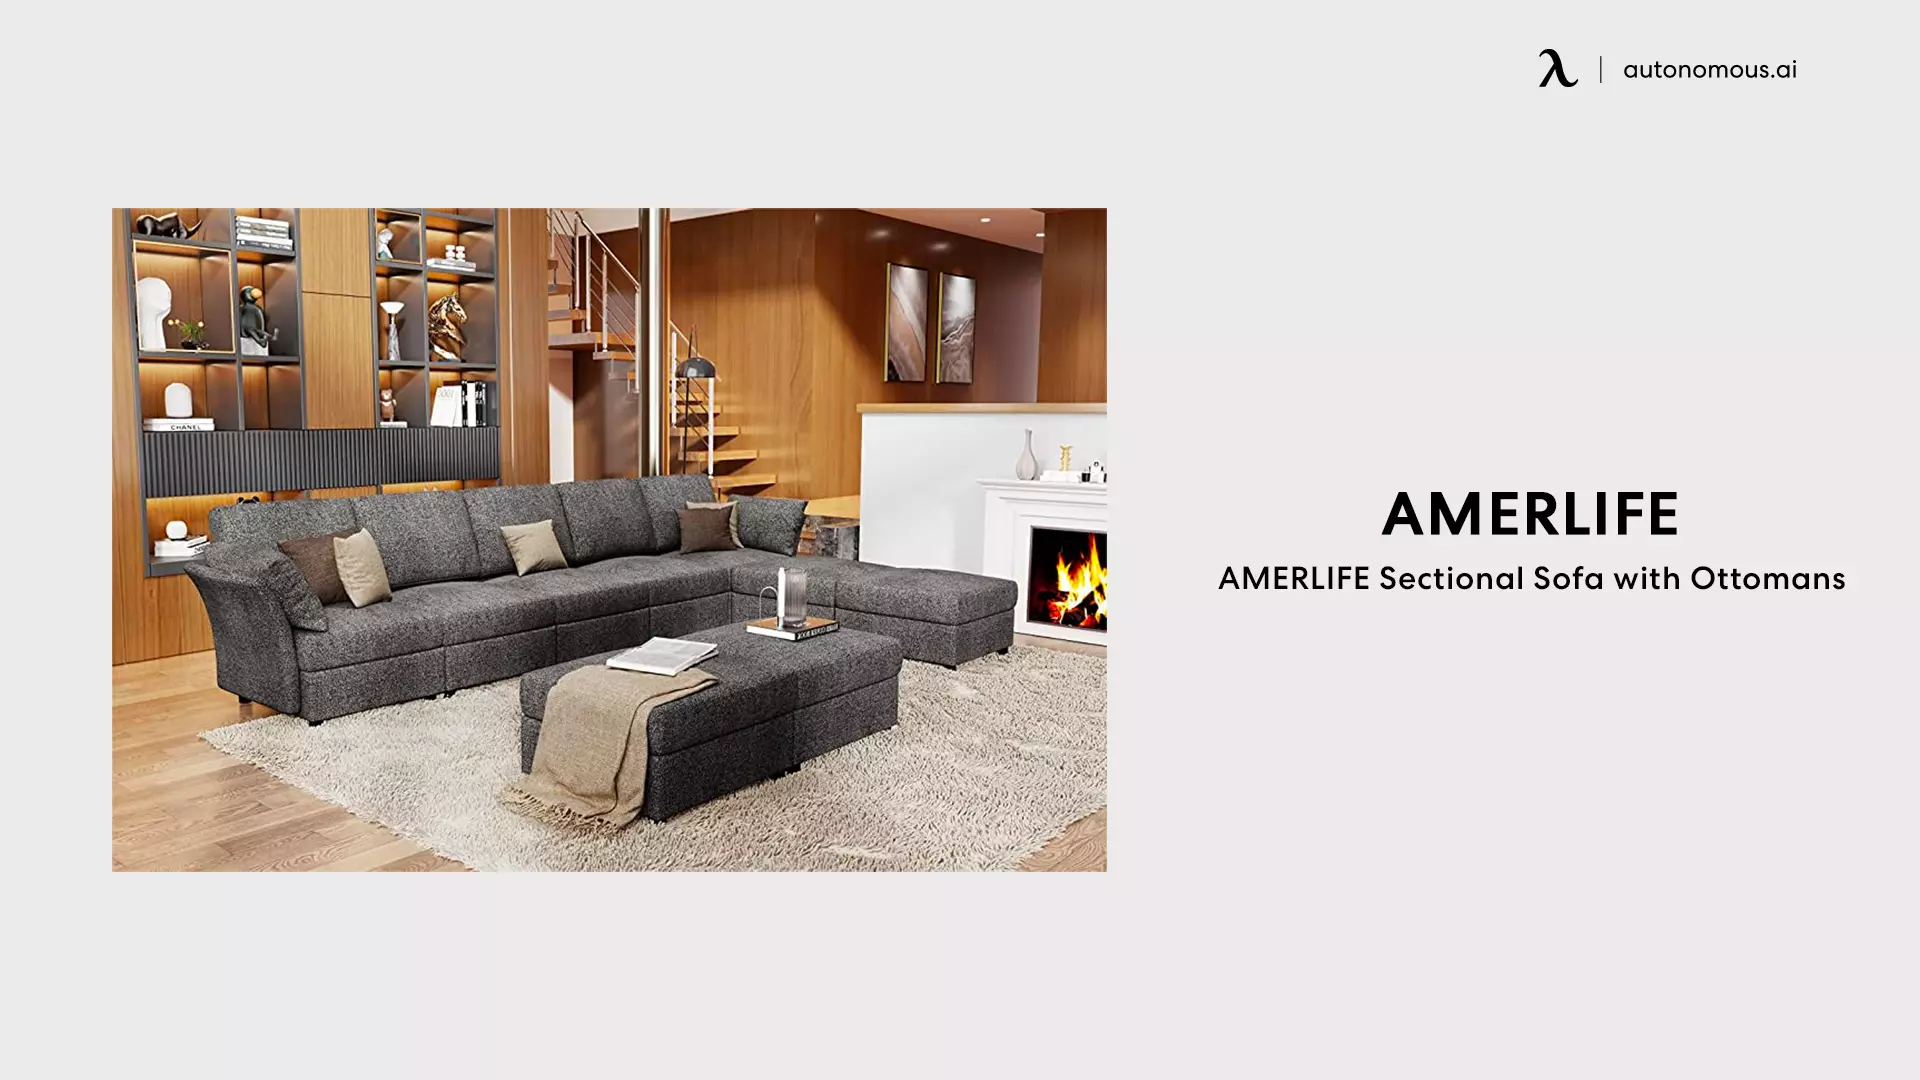 AMERLIFE Sectional Sofa with Ottomans